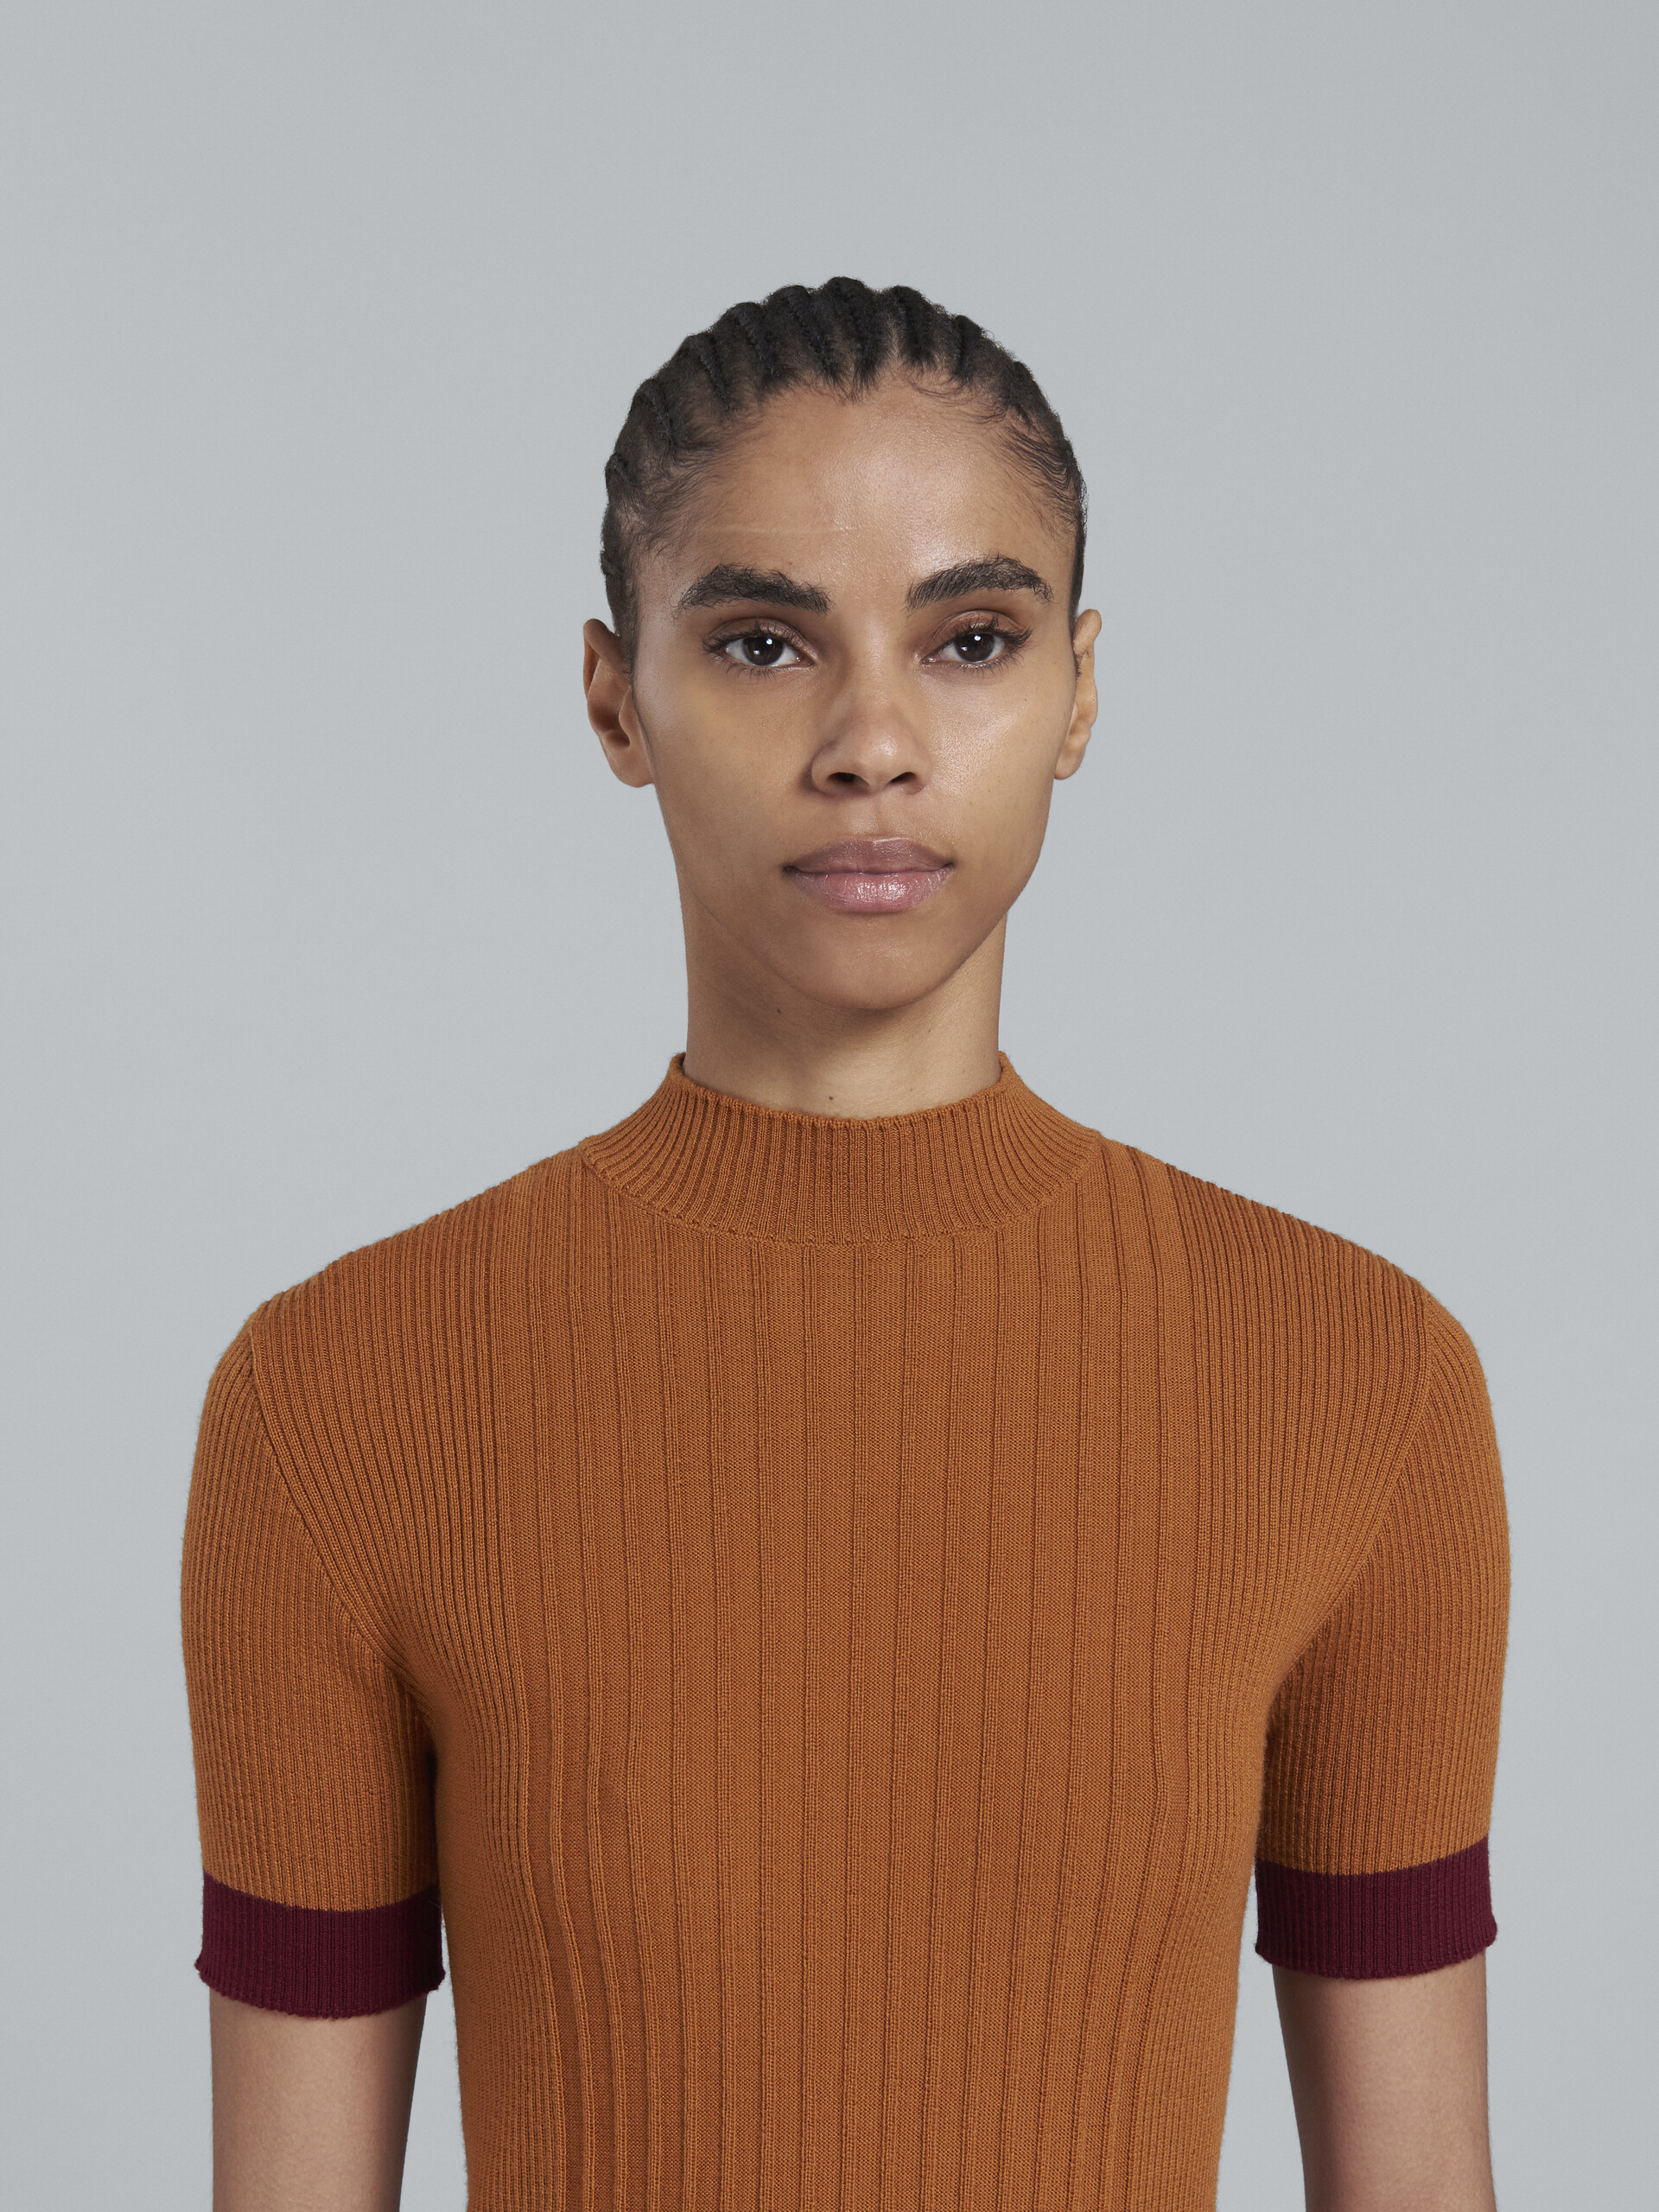 Orange wool turtleneck with contrasting cuffs - Pullovers - Image 4